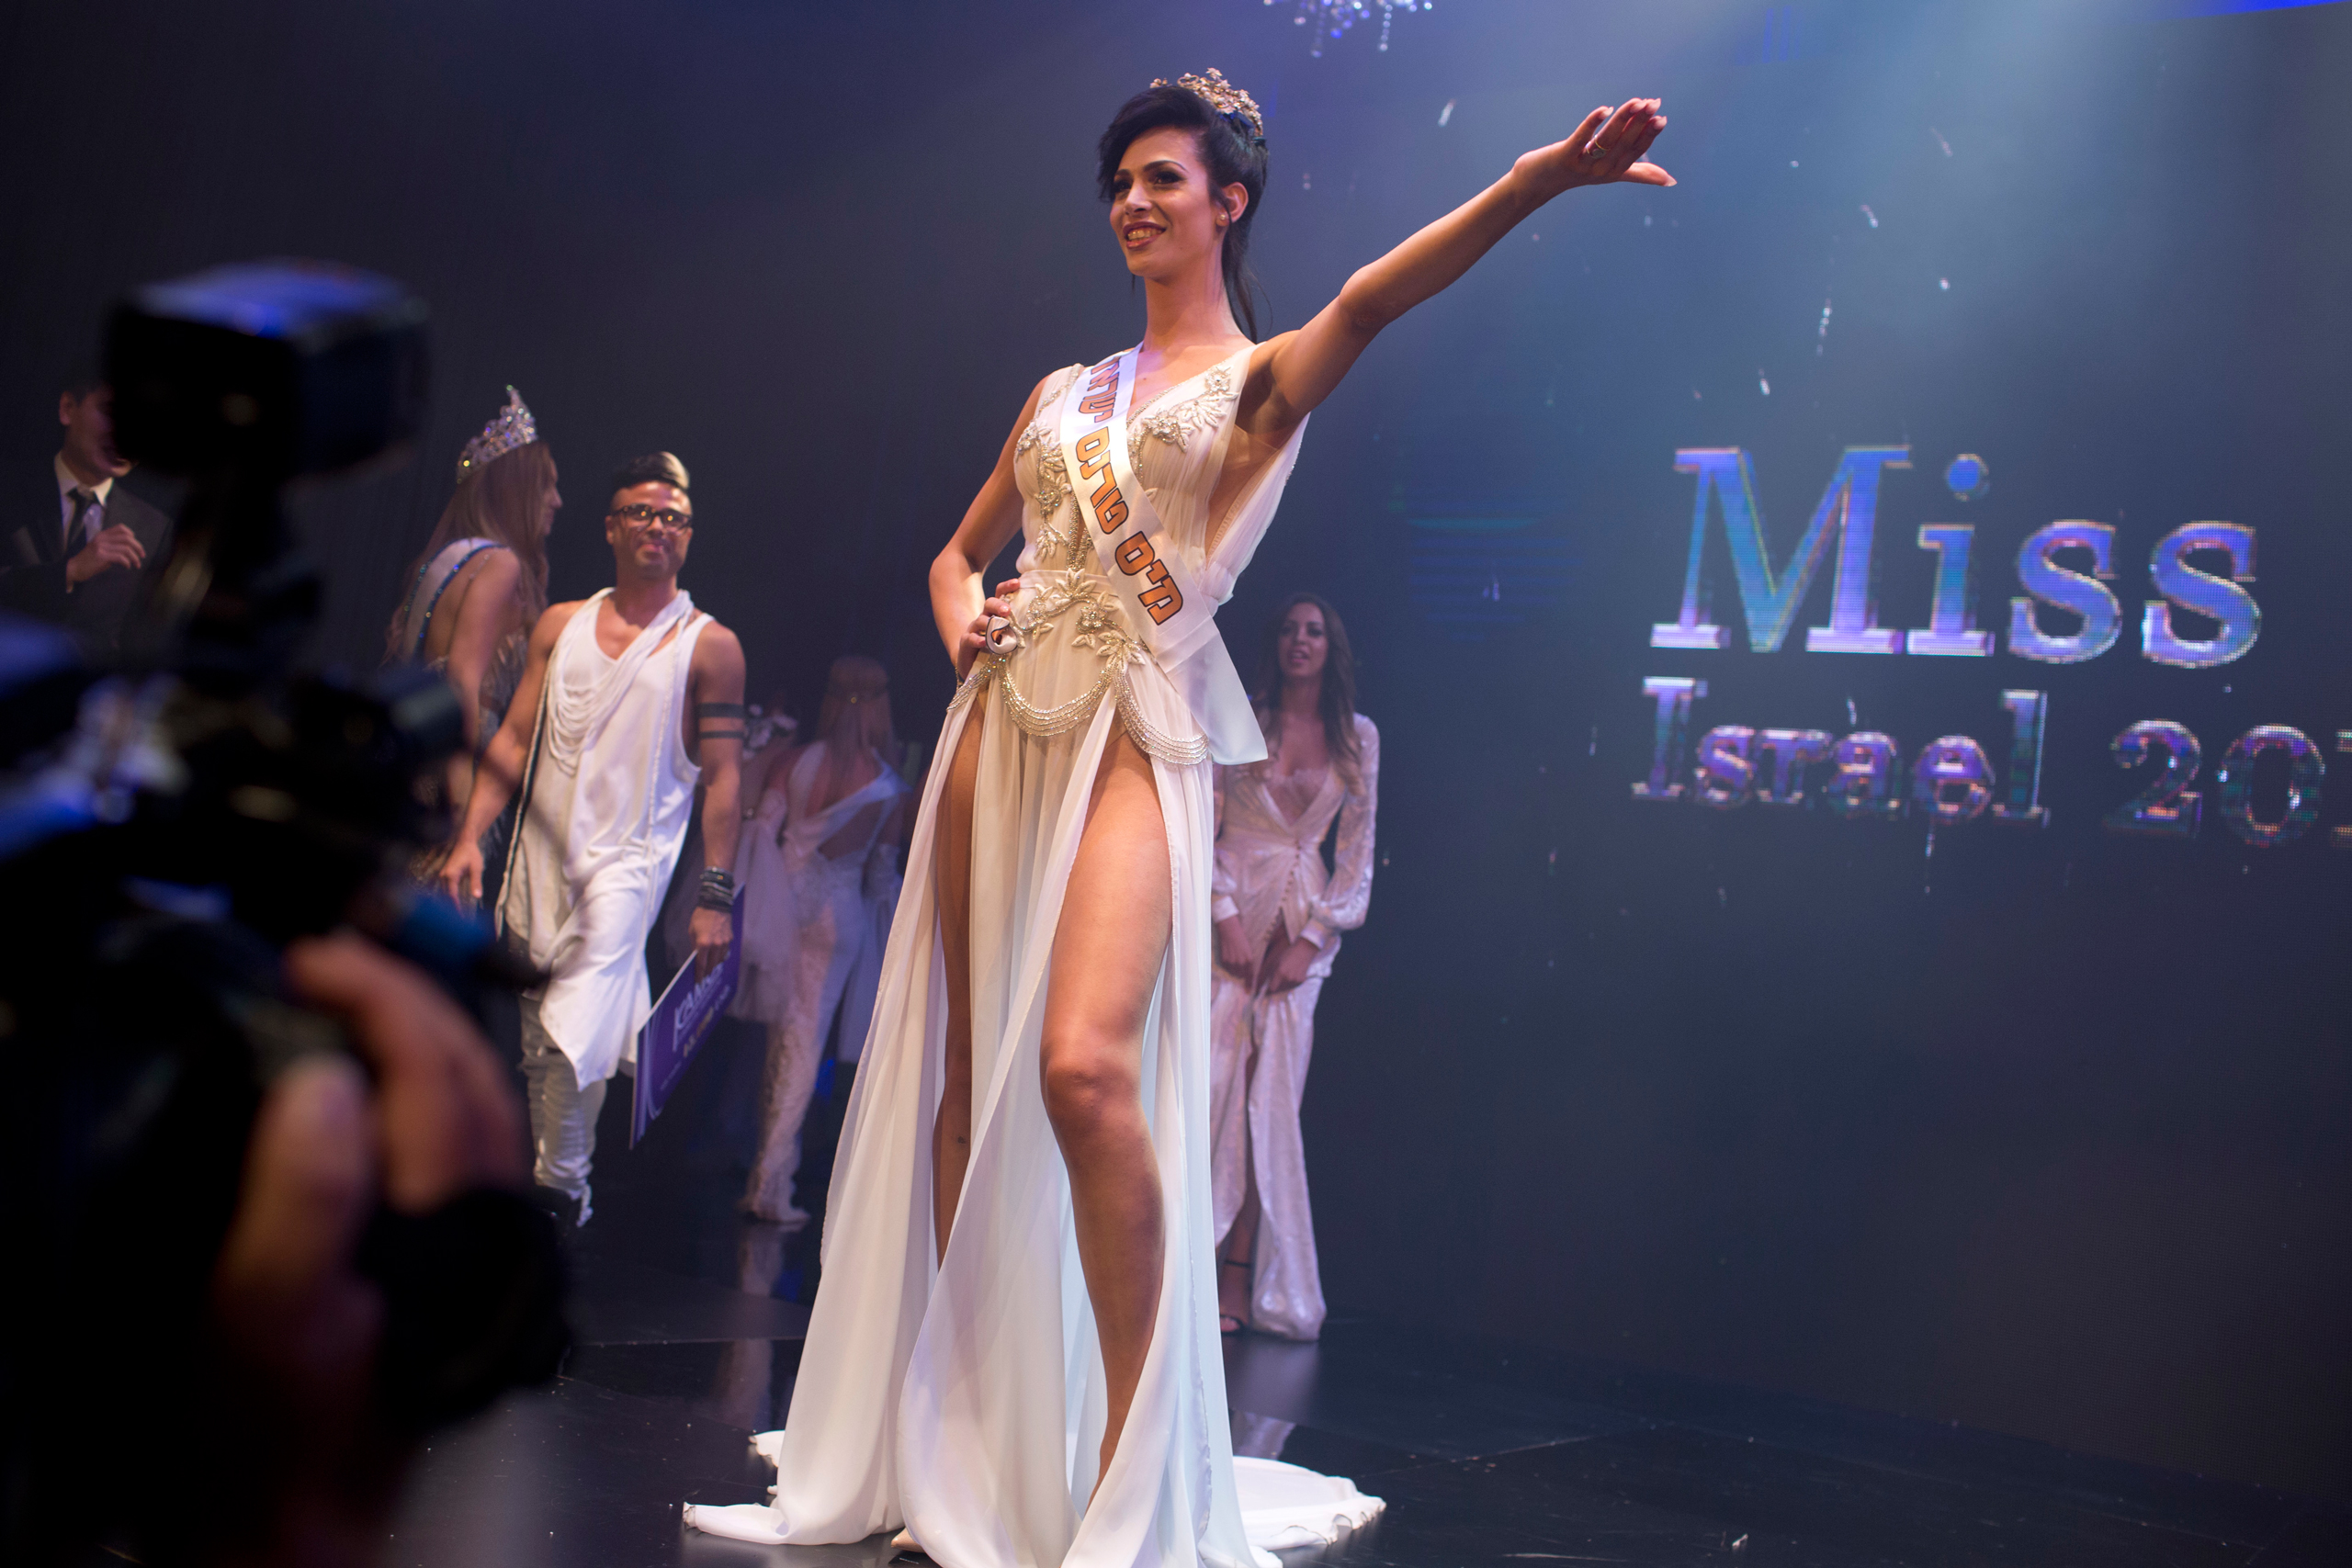 Israeli Arab Talleen Abu Hanna, 21, poses on stage after she was announced as the first Miss Trans Israel beauty pageant, at HaBima, Israel's national theater in Tel Aviv on May 27, 2016. (Oded Balilty—AP)